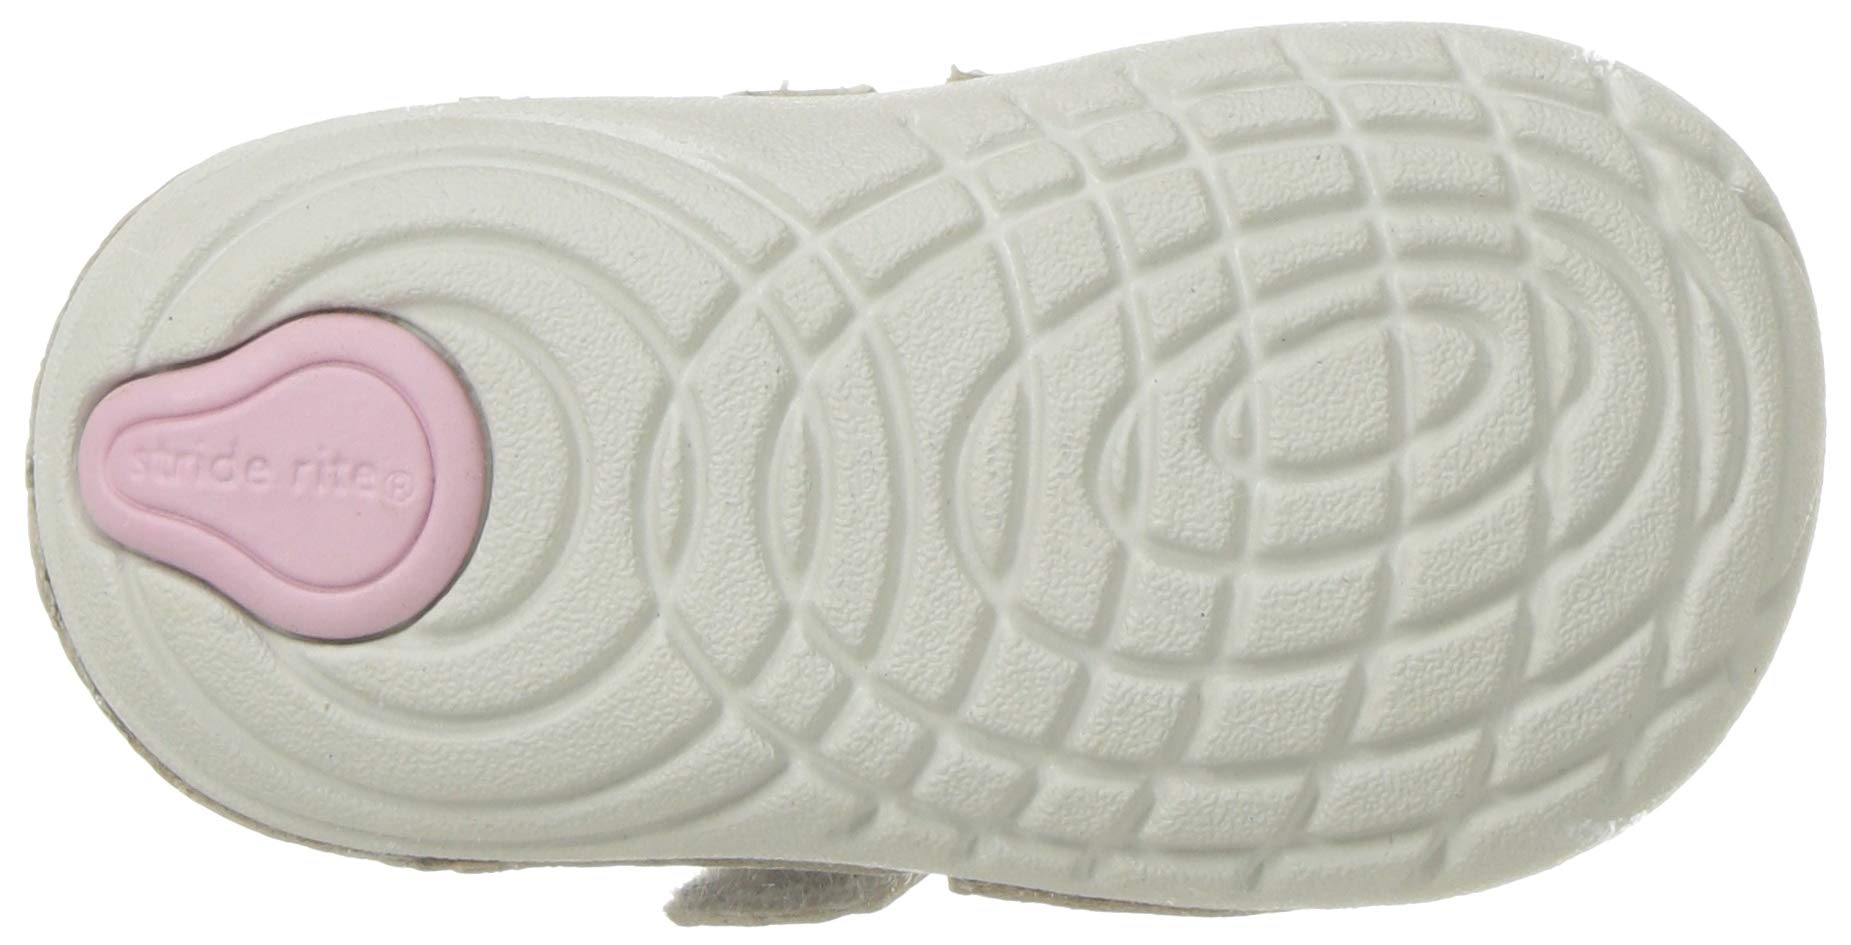 Stride Rite Soft Motion Baby and Toddler Girls Jazzy Casual Sneaker